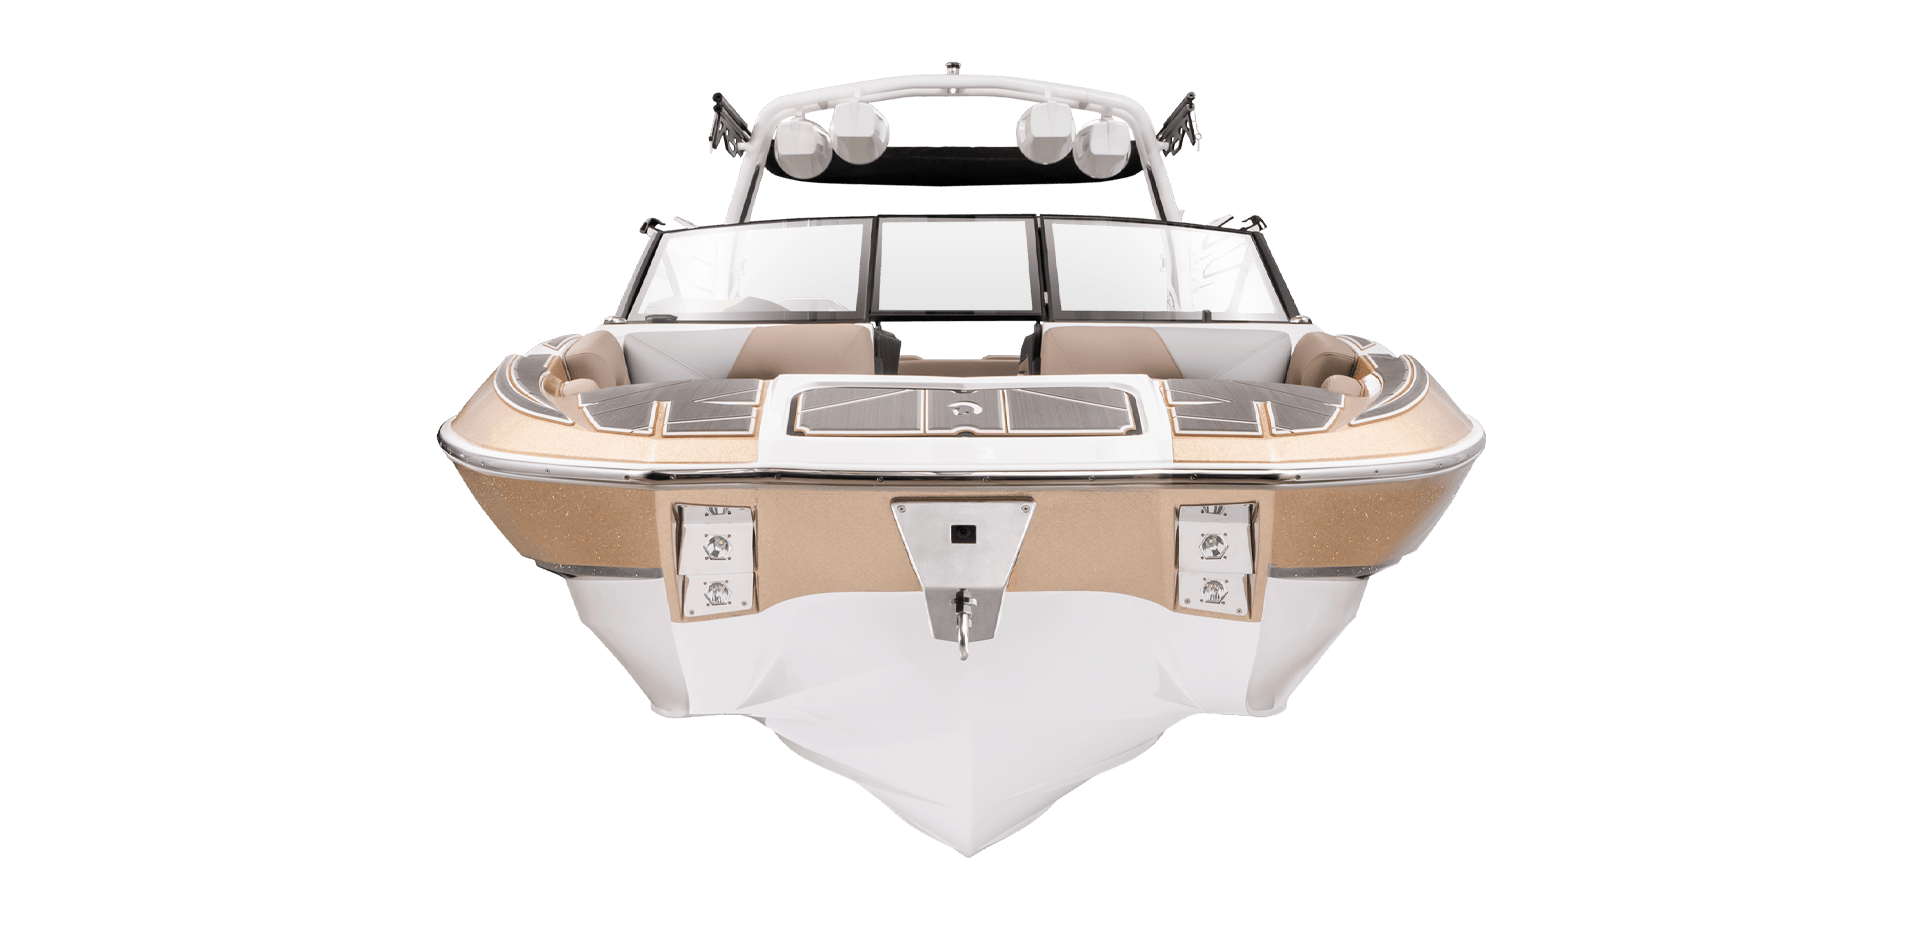 Front view of a recreational powerboat with tan and white seating, windshield, and mounted equipment on top.